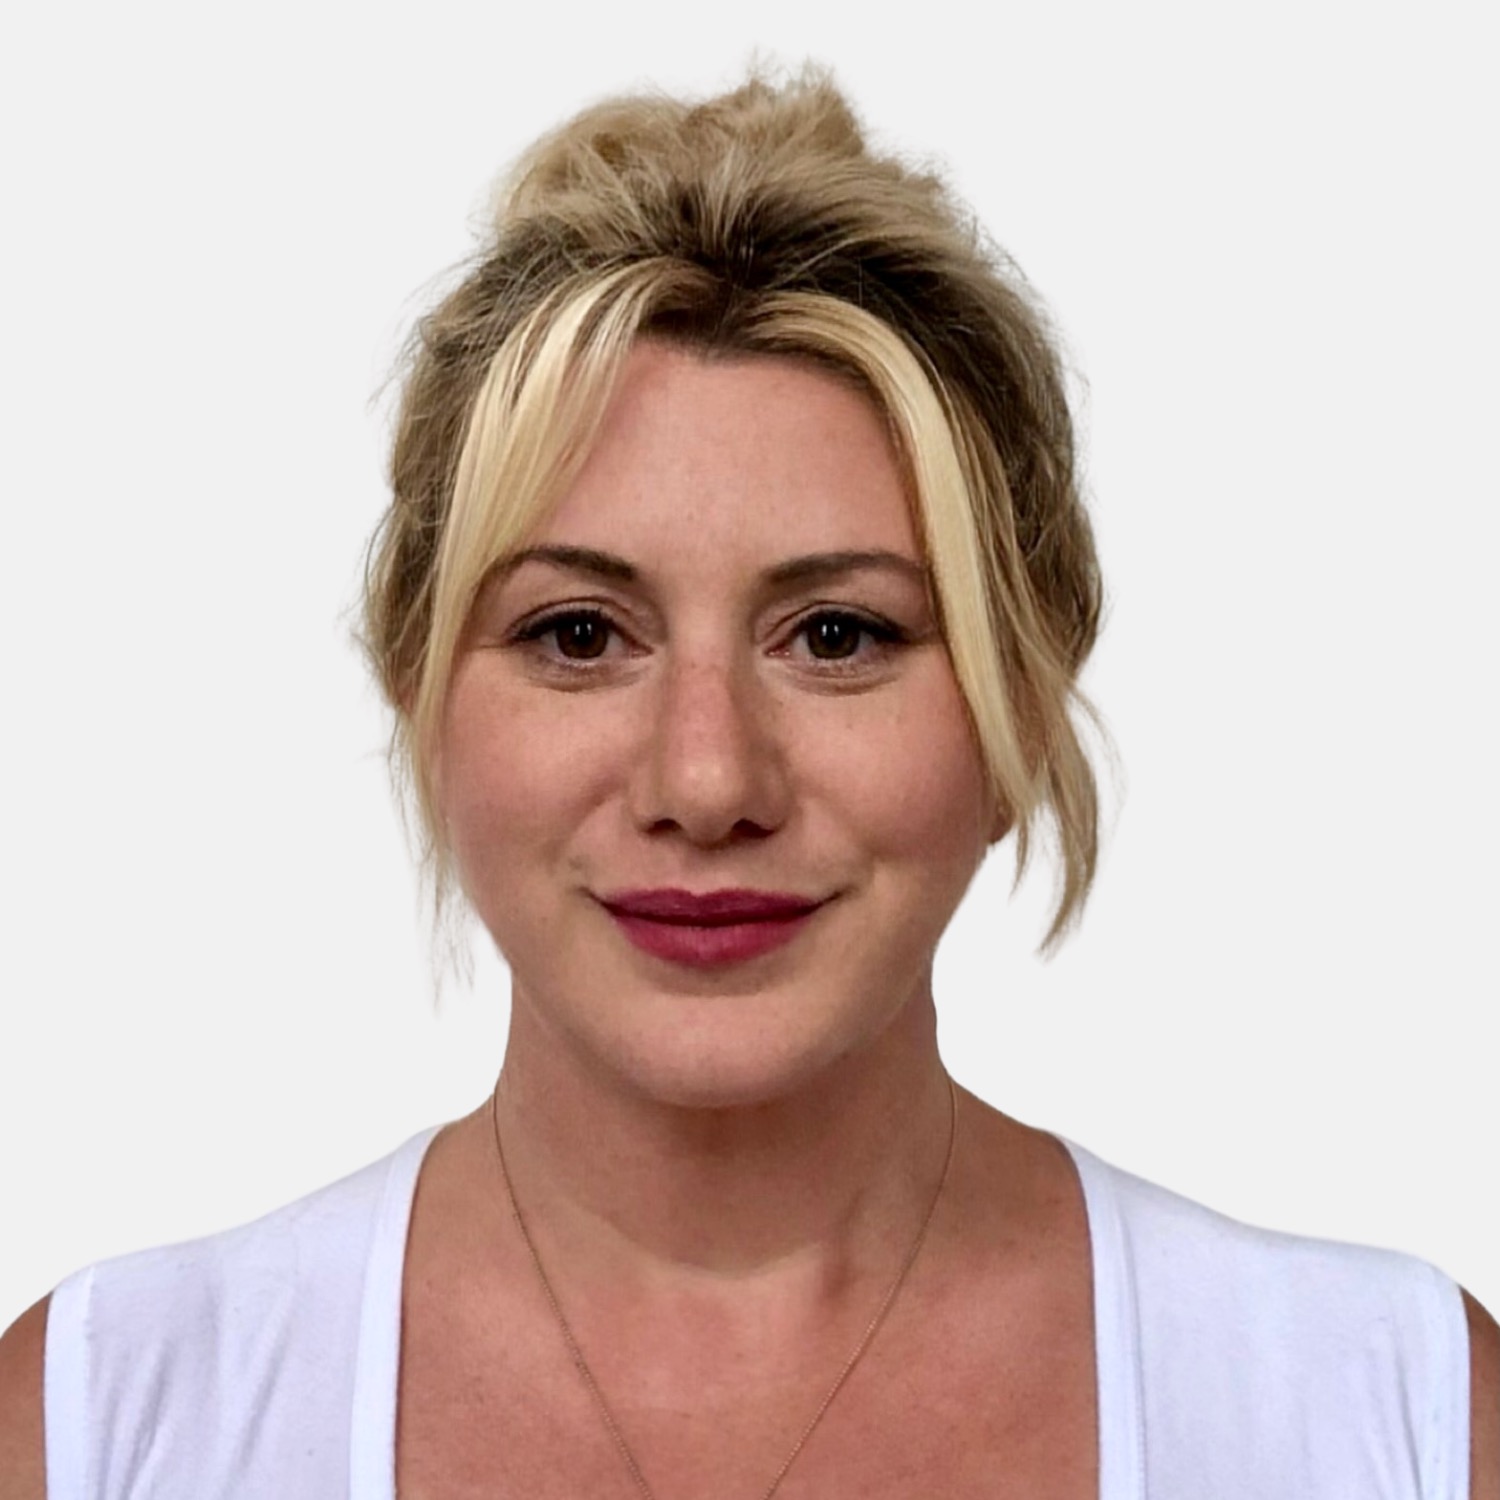 A headshot of a woman (Anna Harper) in front of a white background.